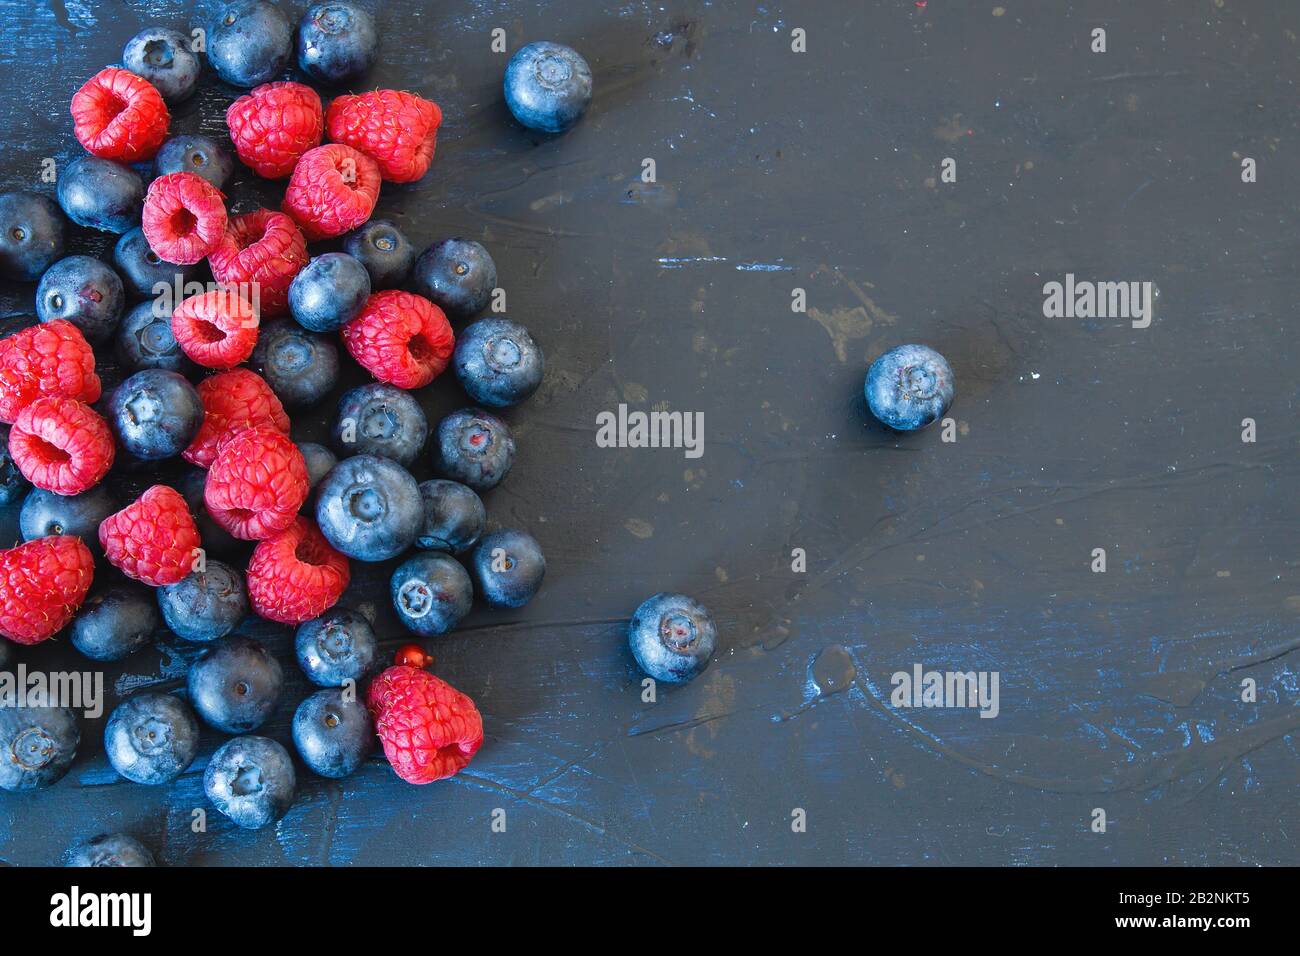 Blueberries and raspberries on dark backdrop, copy space Stock Photo